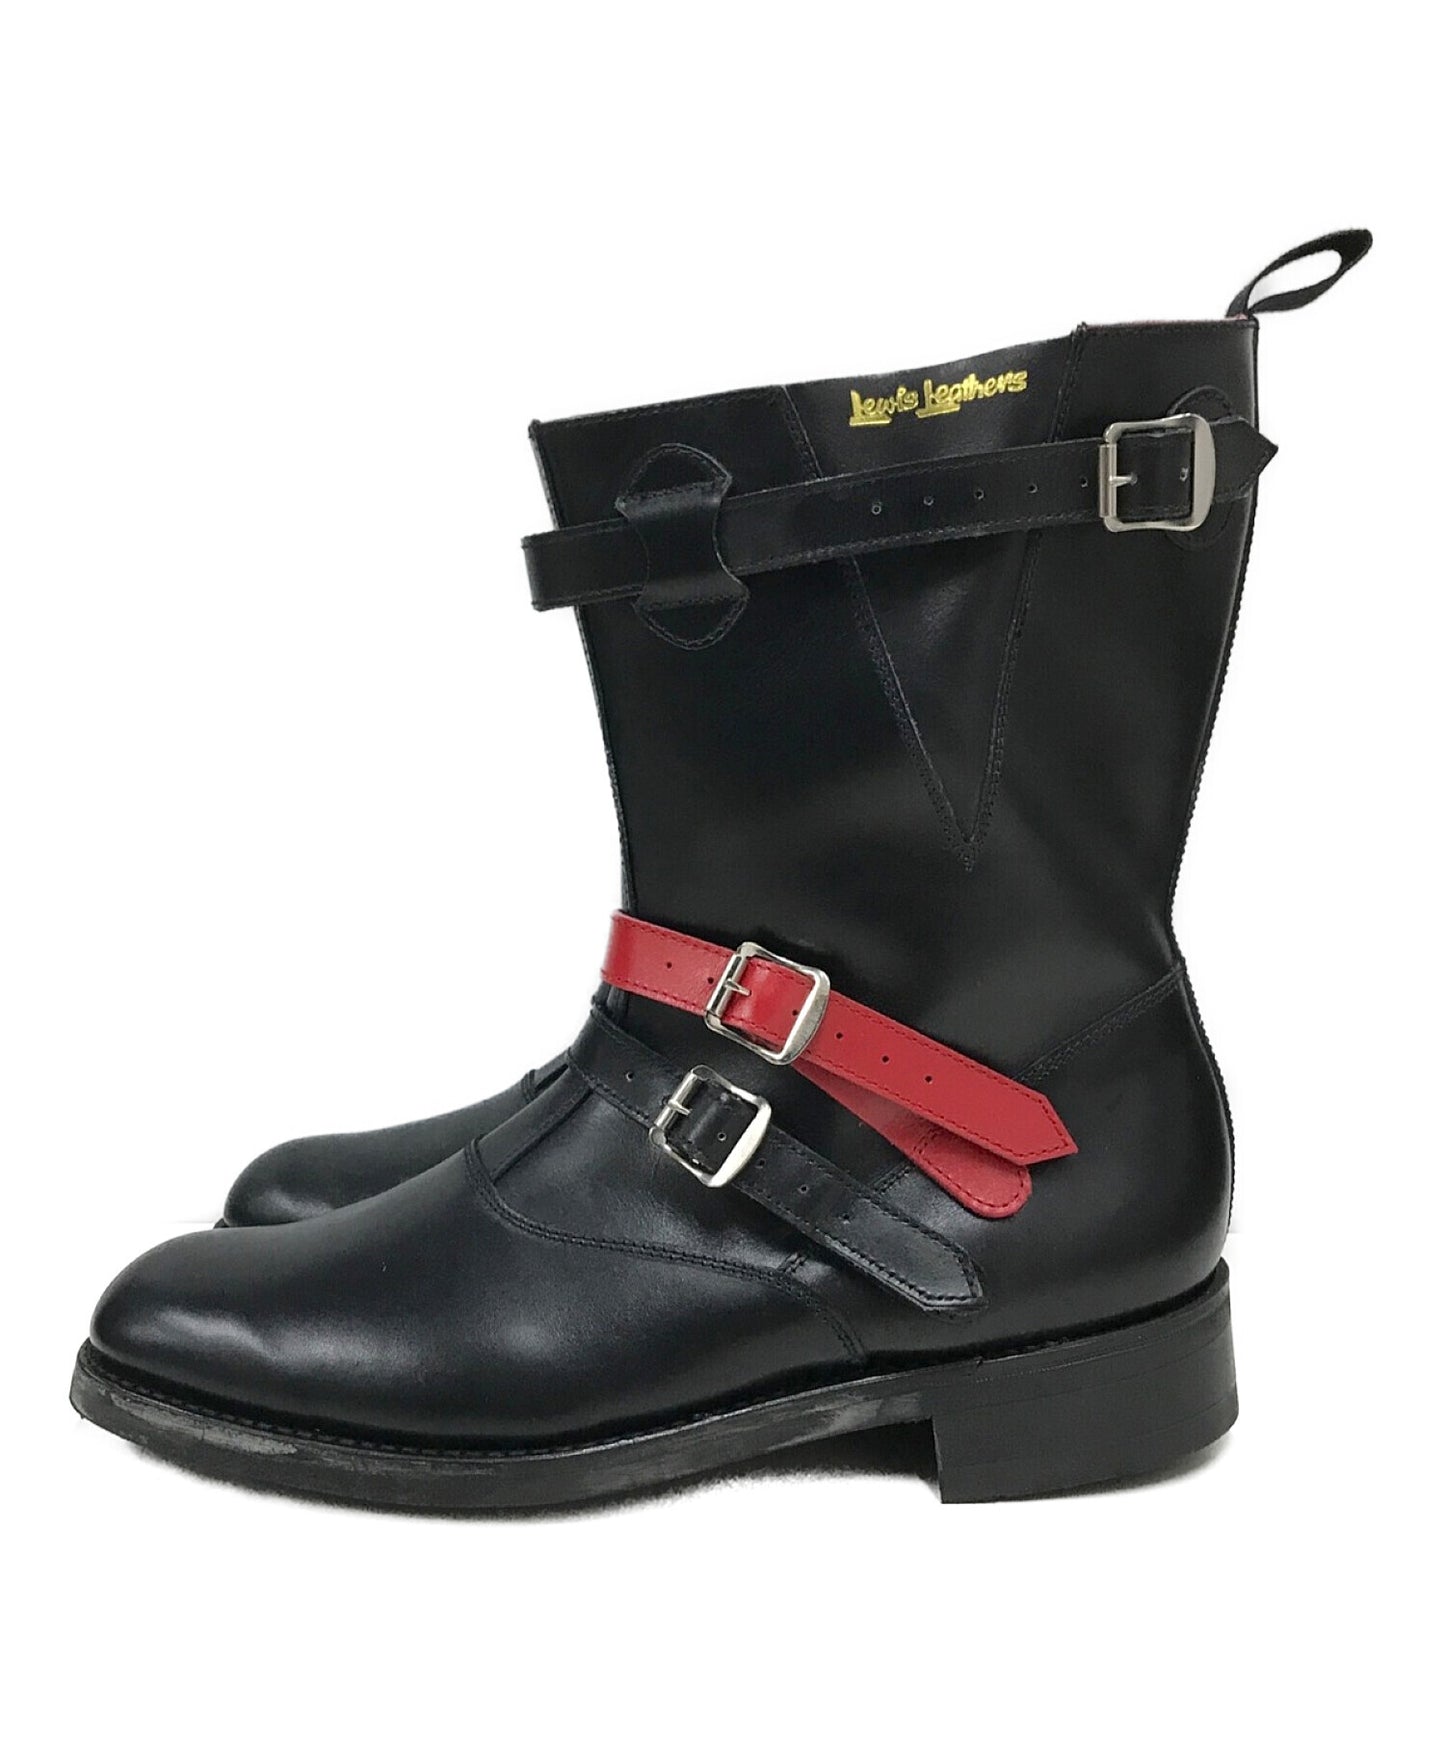 [Pre-owned] Lewis Leathers Special order 'Atlantic No. 209' engineered boots LL209 JAN1226 M3653